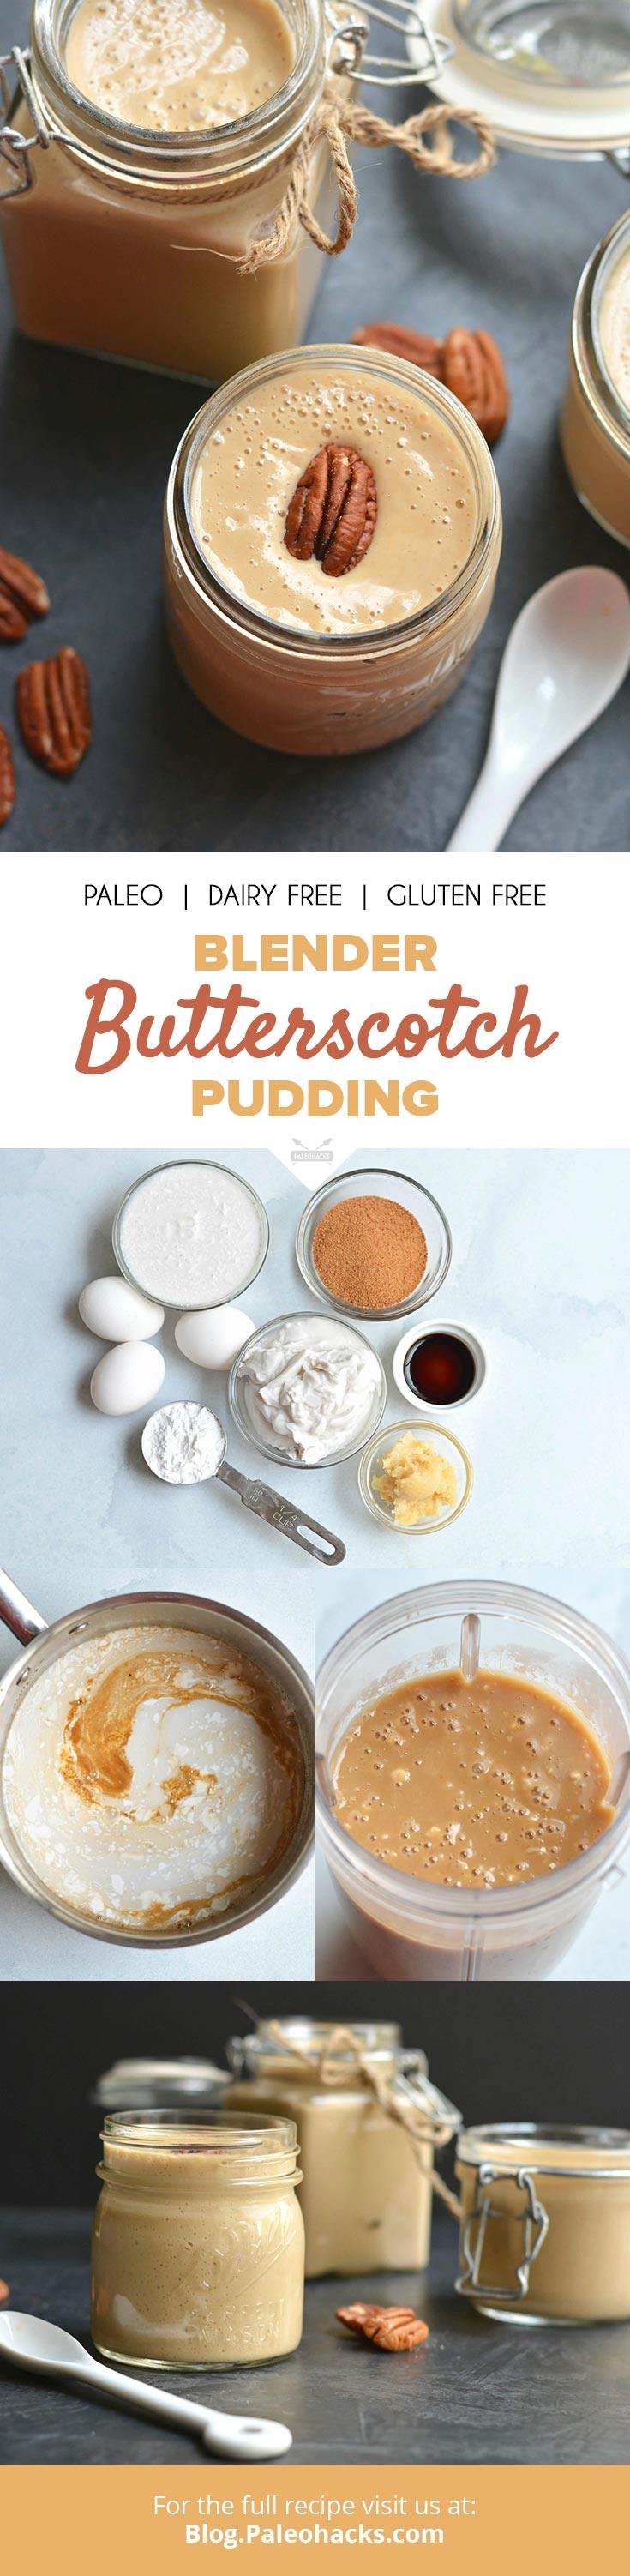 Blend up a butterscotch pudding in just five minutes for a quick and creamy dessert! Try this Paleo-friendly pudding recipe made with all natural and wholesome ingredients.